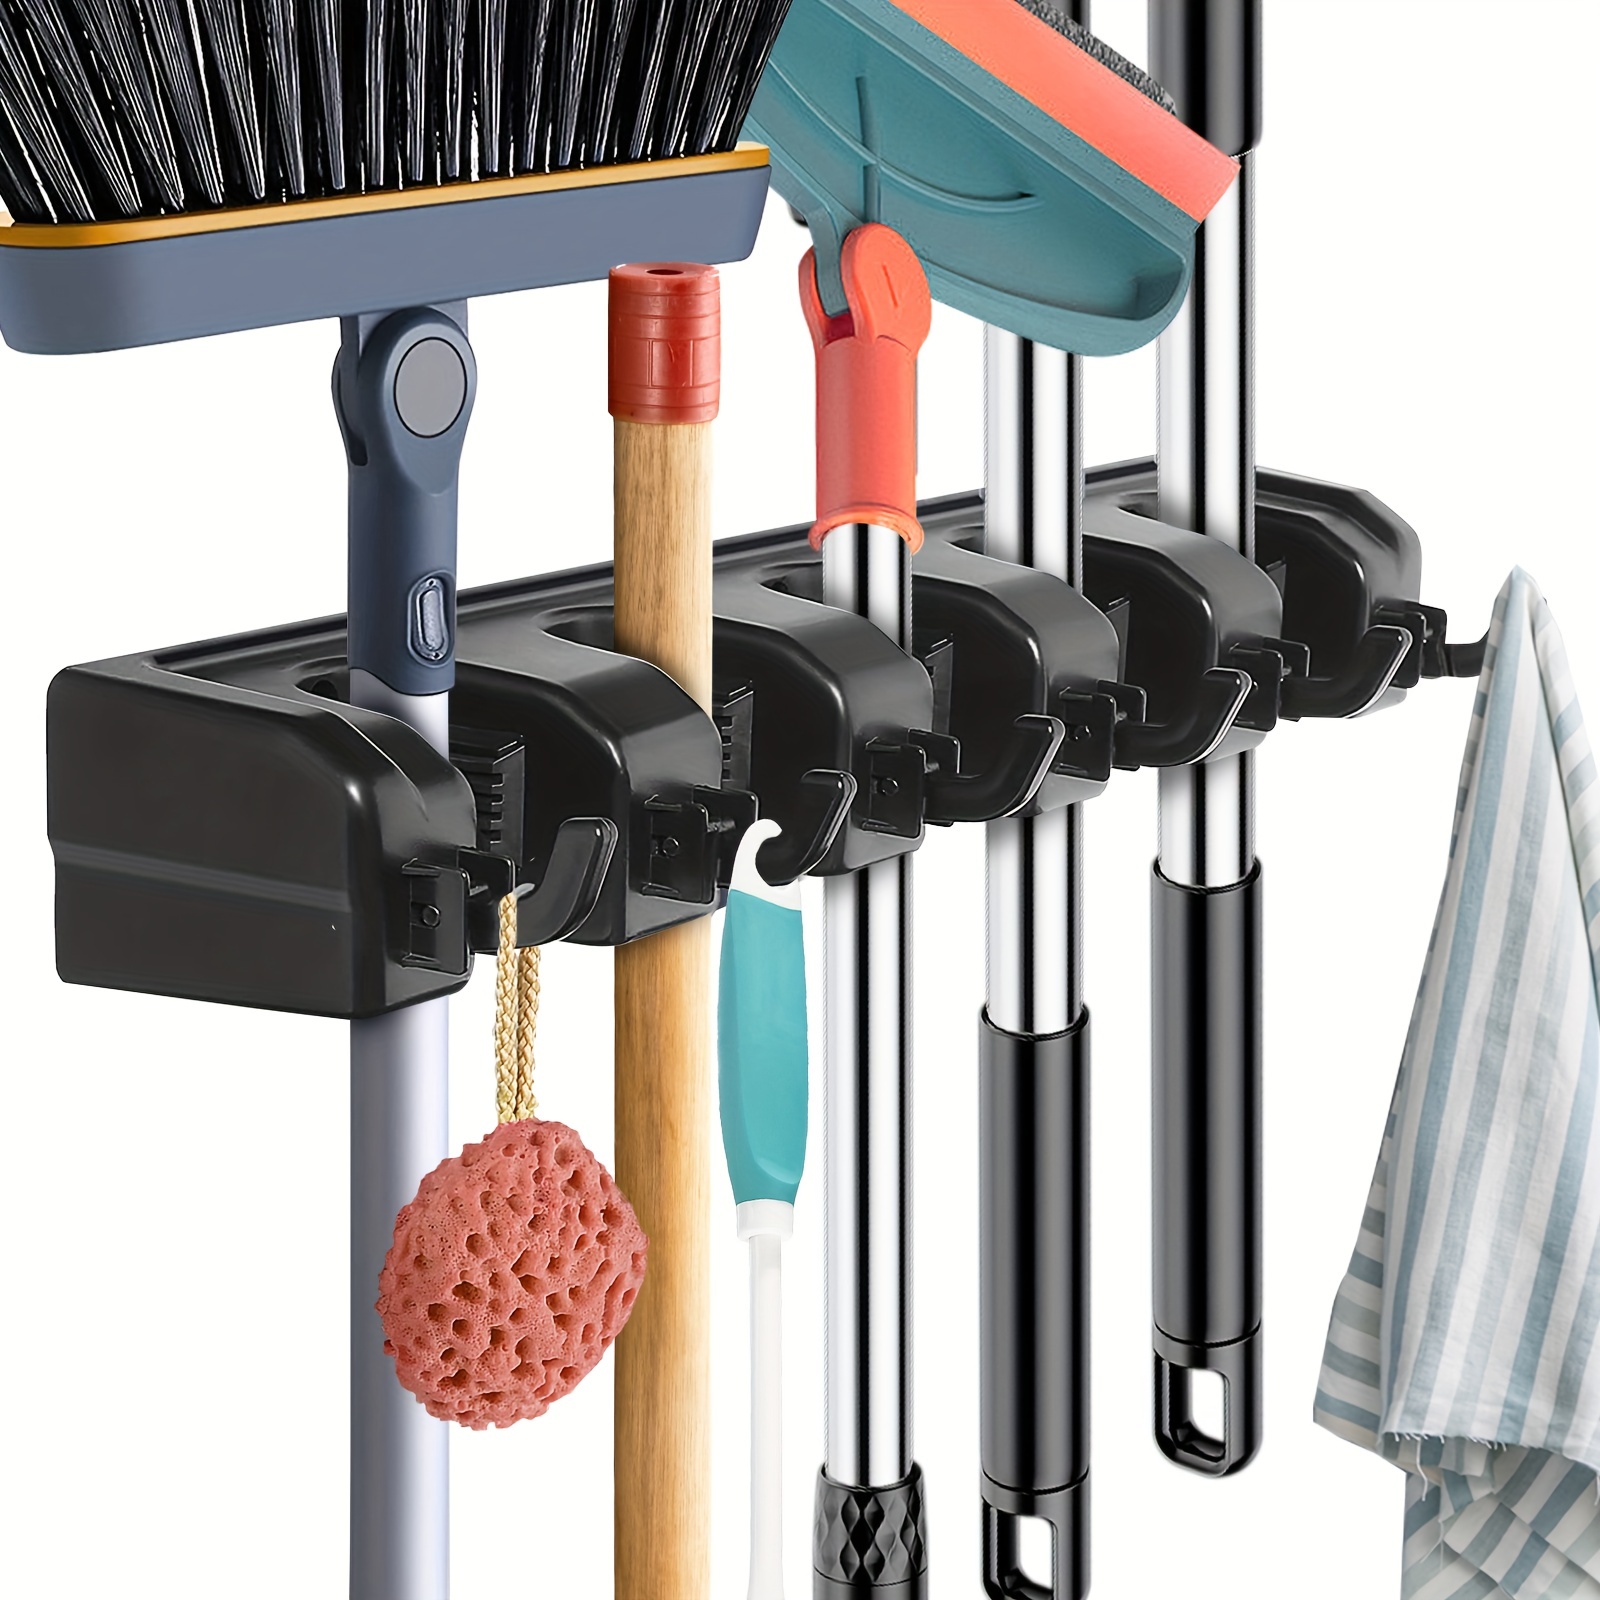 Mop and Broom Holder Wall Mount - Heavy Duty Broom Holder Wall Mounted or Tool Organizer for Home Garden Garage and Storage (5 Positions with 6 Hooks)